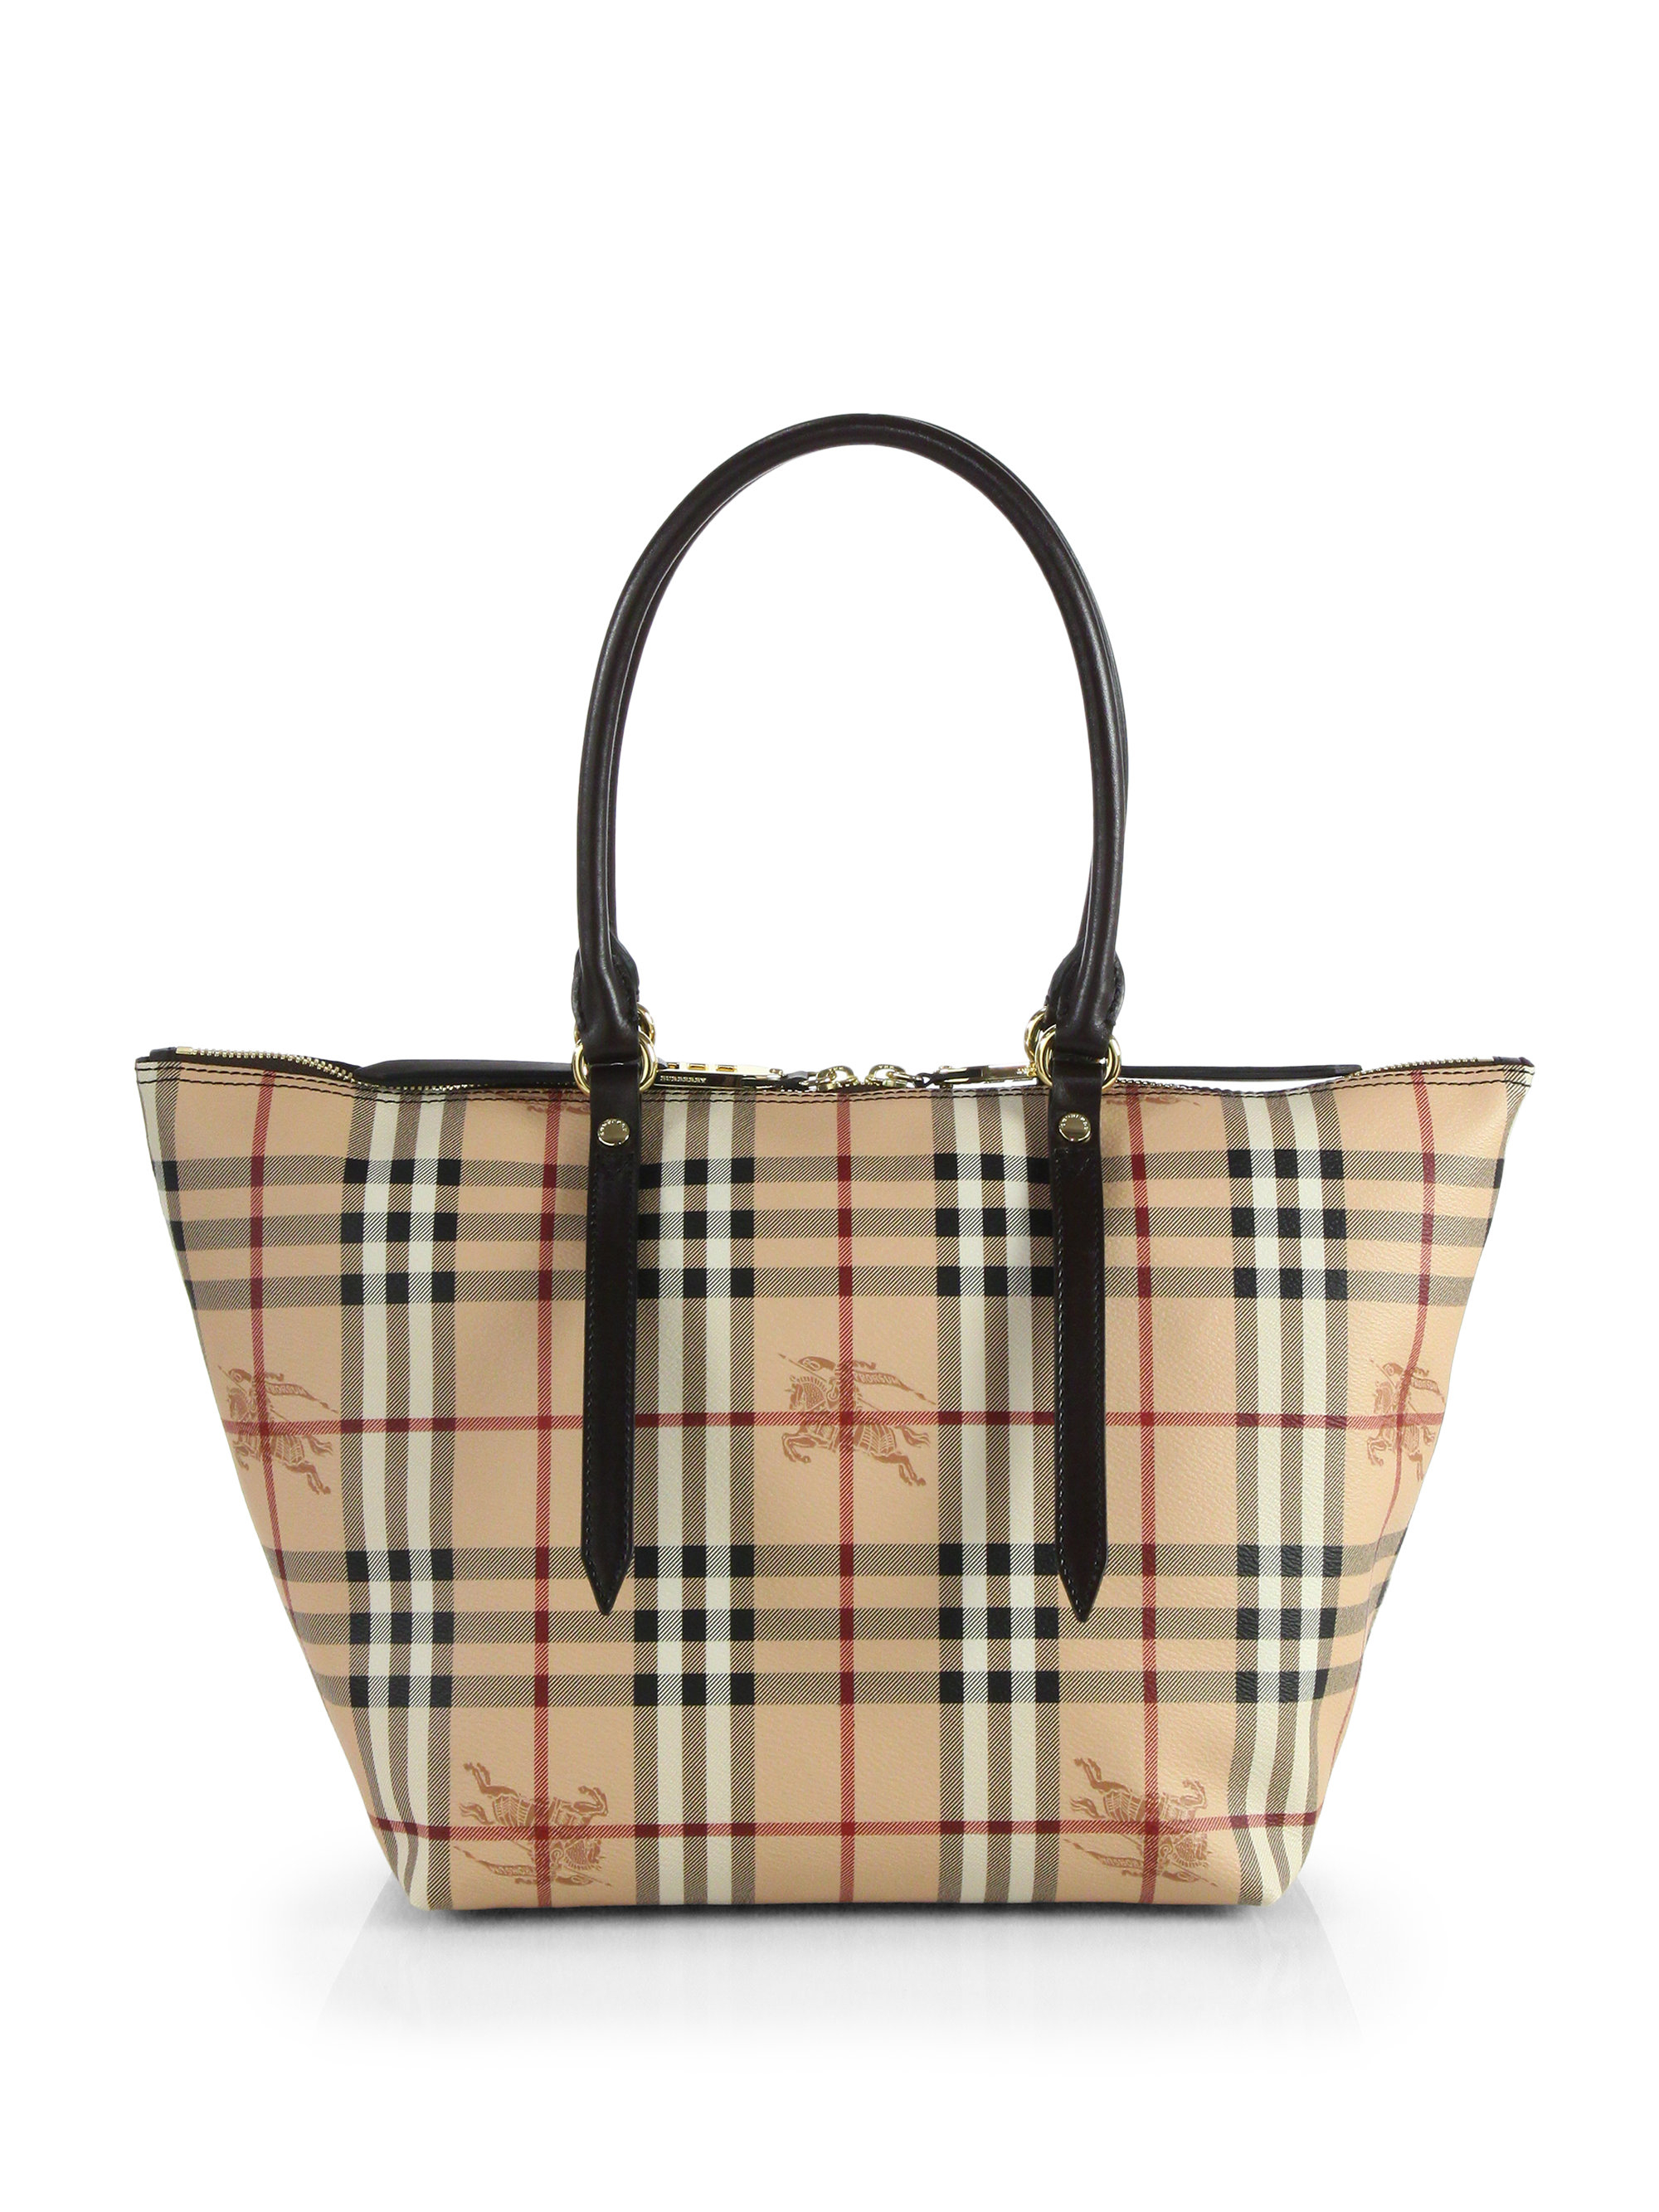 Burberry Bags Cyber Monday 